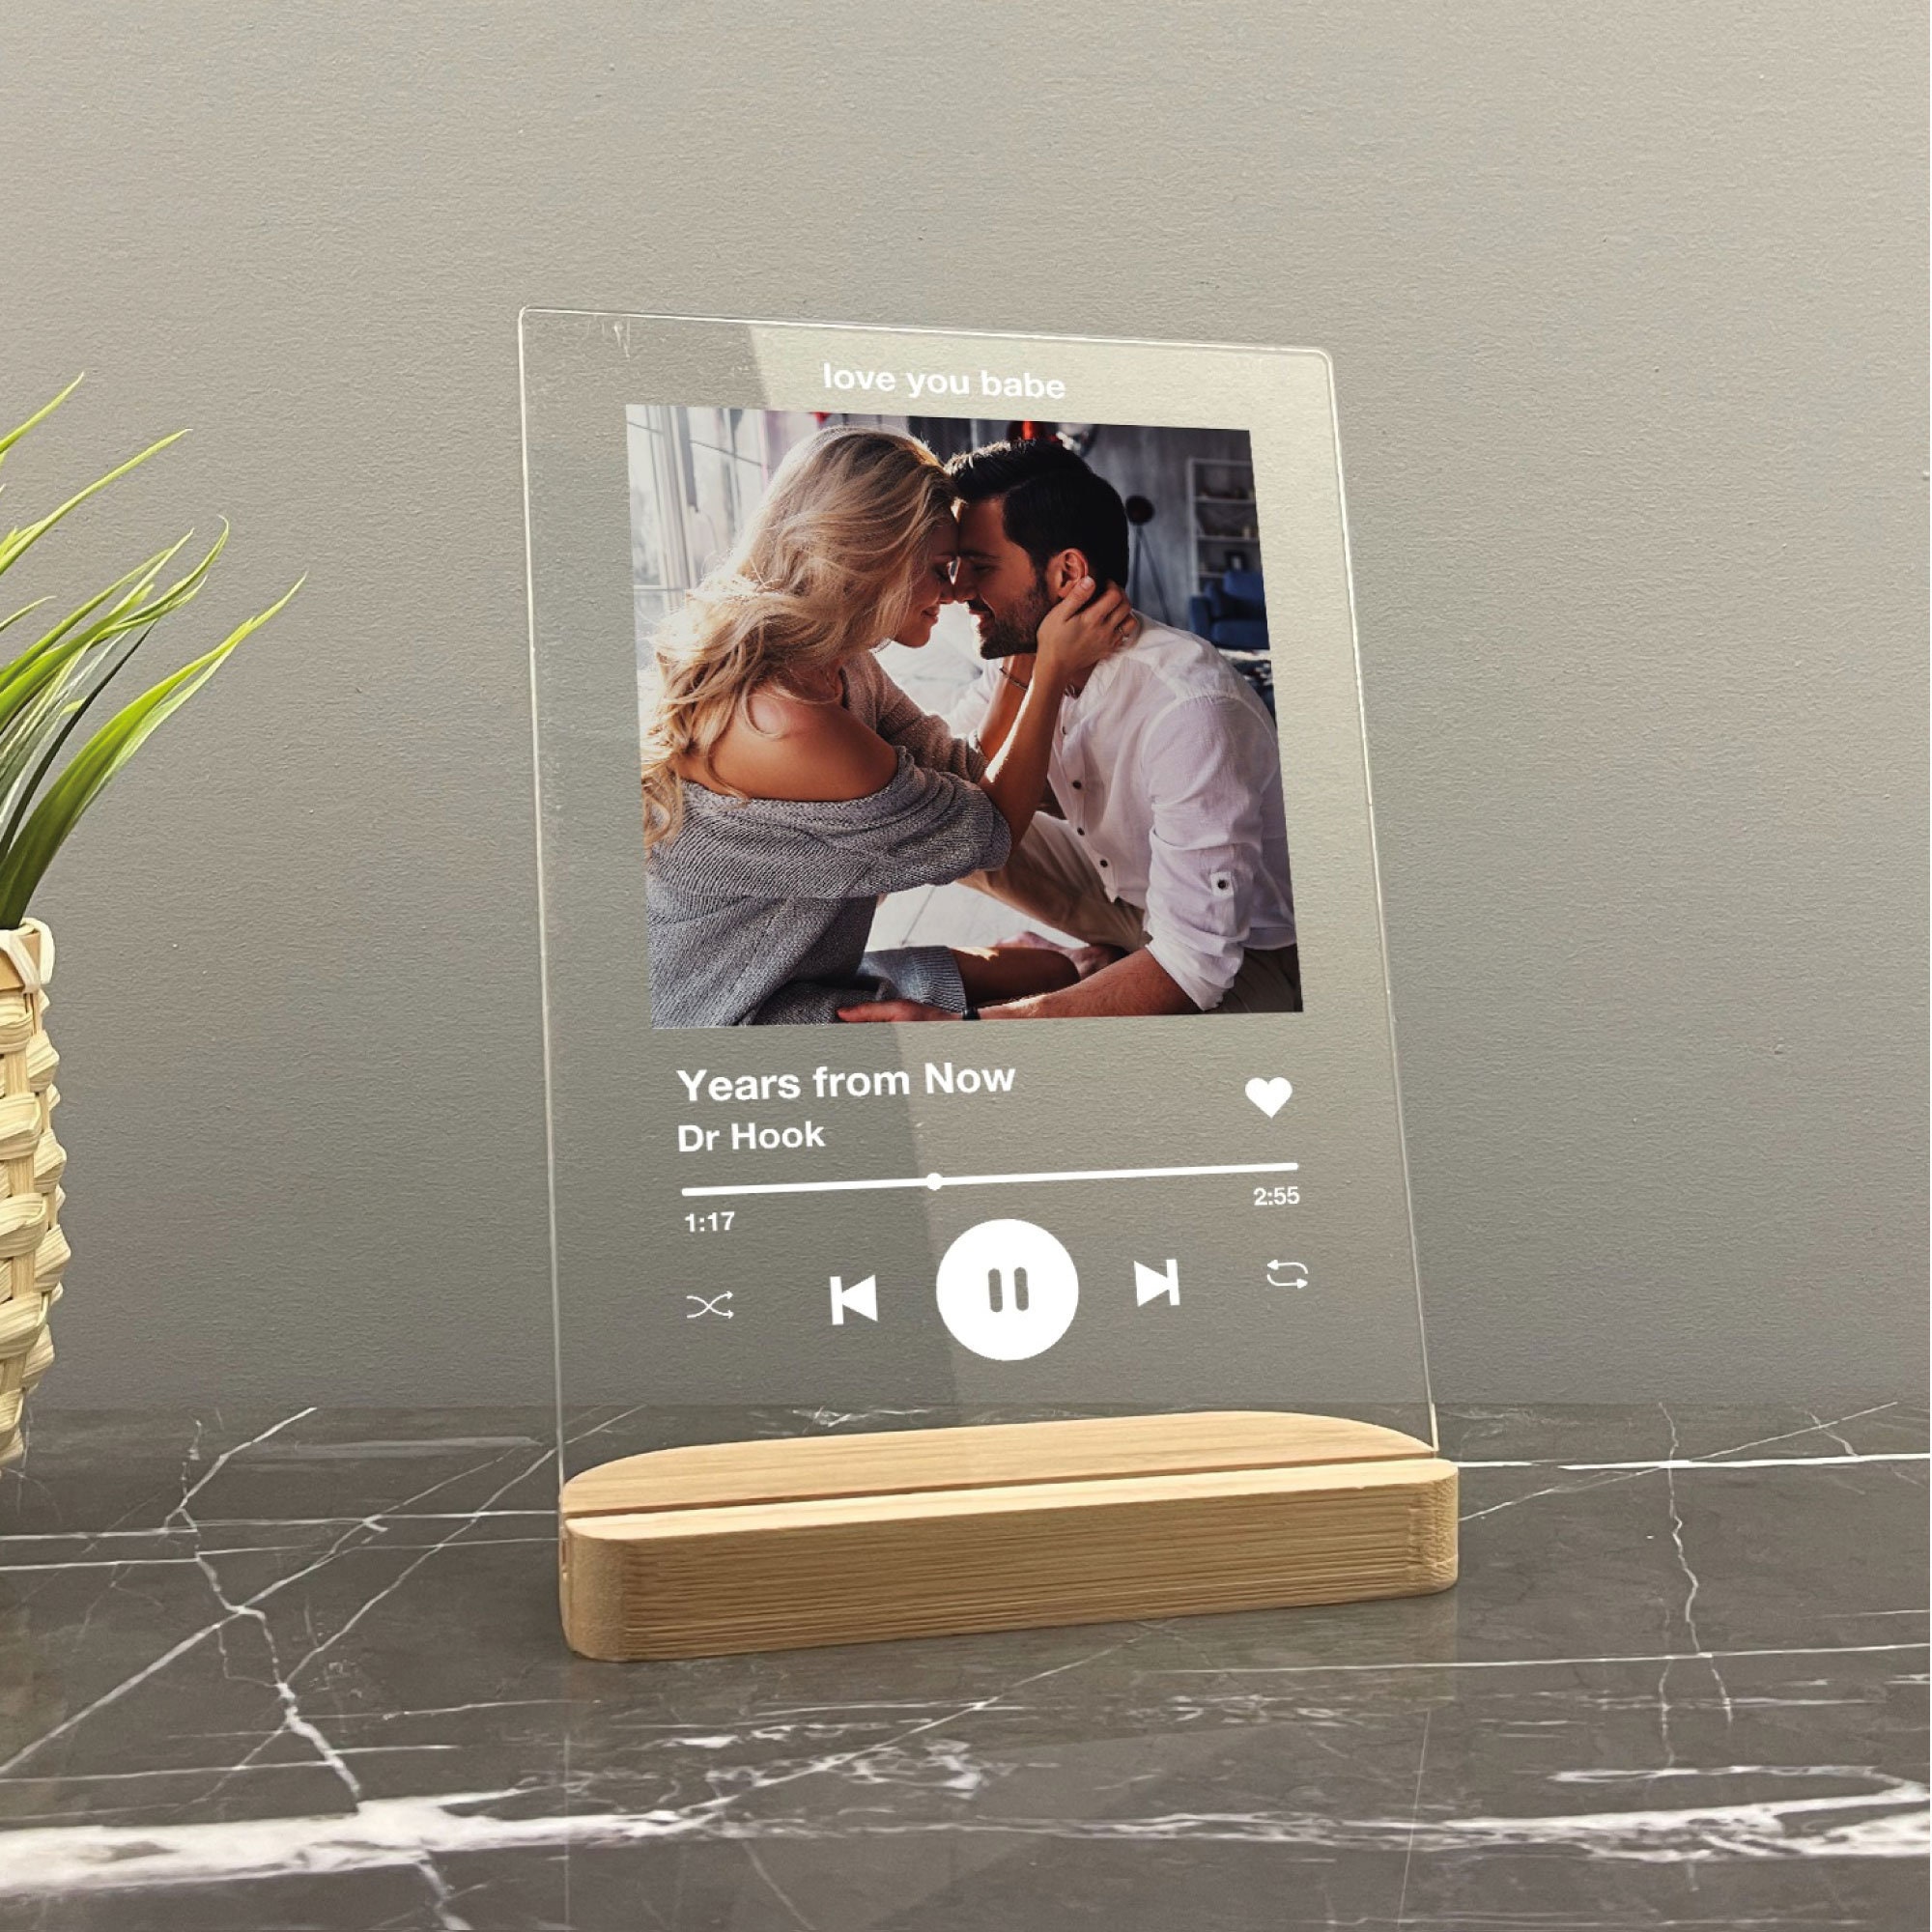  Songs Acrylic Custom Girlfriend Birthday Gifts, Personalized  Acrylic Plaque with Acrylic Stand Playlist Picture Frame Cute Boyfriend  Gifts Christmas Gifts : Home & Kitchen